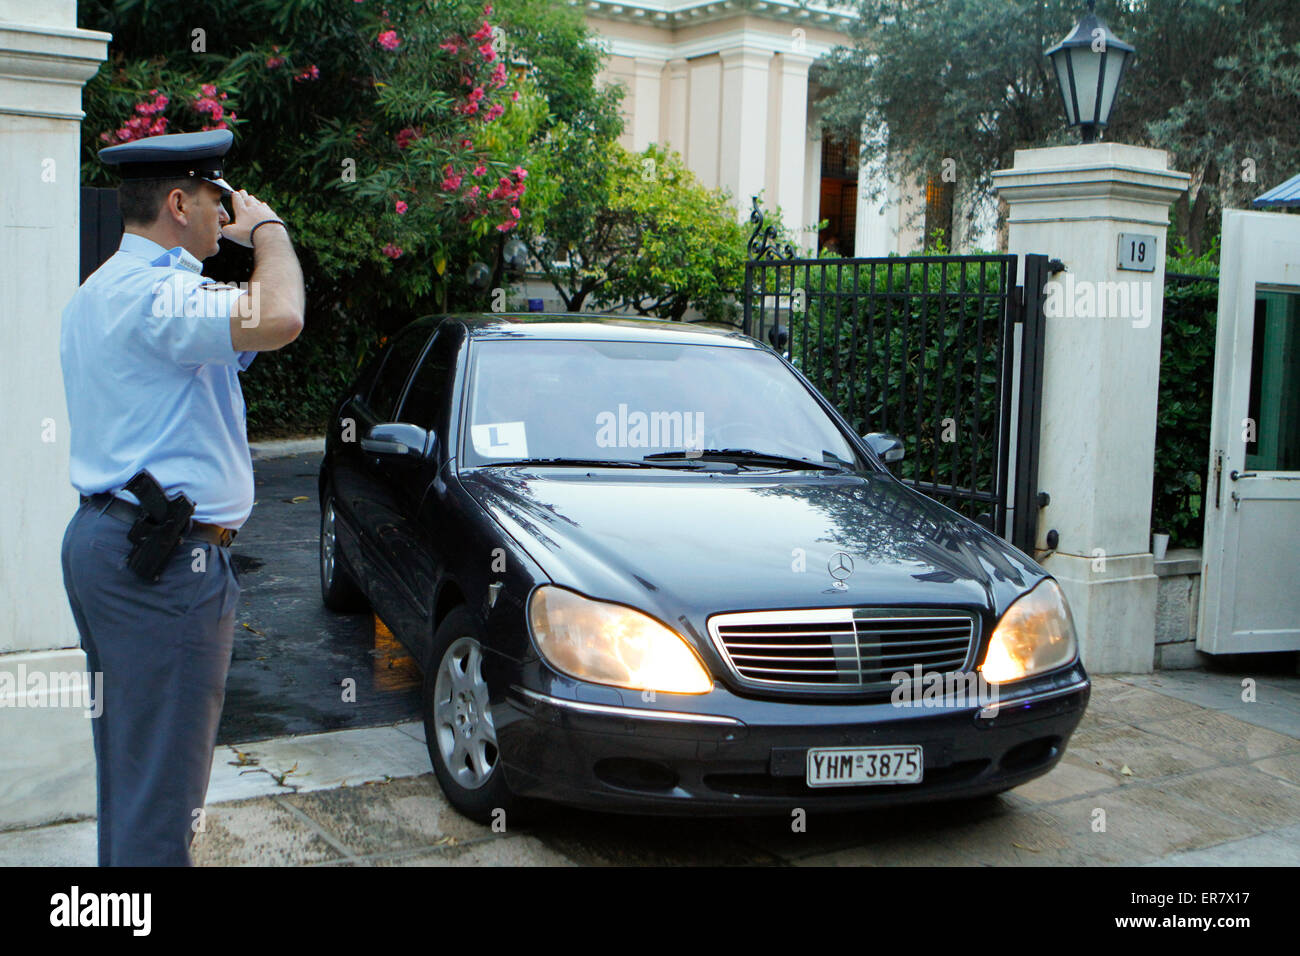 Athens, Greece. 28th May, 2015. The Iranian Minister of Foreign Affairs Mohammad Javad Zarif leaves the Maximos Mansion in a Mercedes. A police officer salutes. The Iranian Foreign Minister paid a visit to the Greek Prime Minister Alexis Tsipras at his official seat in the Maximos Mansion. Credit:  Michael Debets/Pacific Press/Alamy Live News Stock Photo